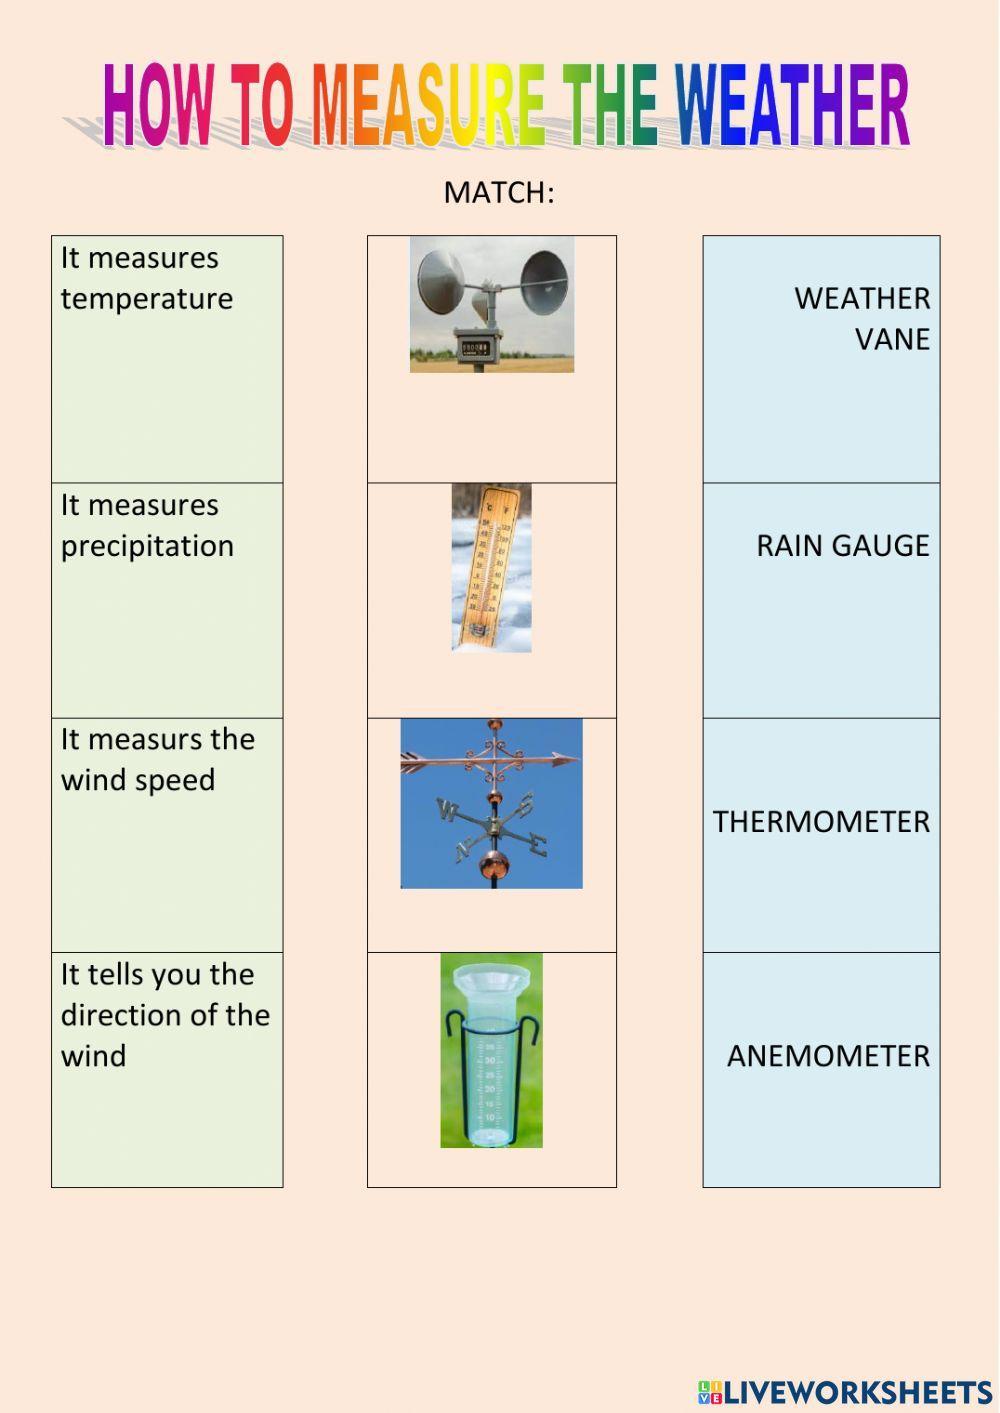 How to measure weather